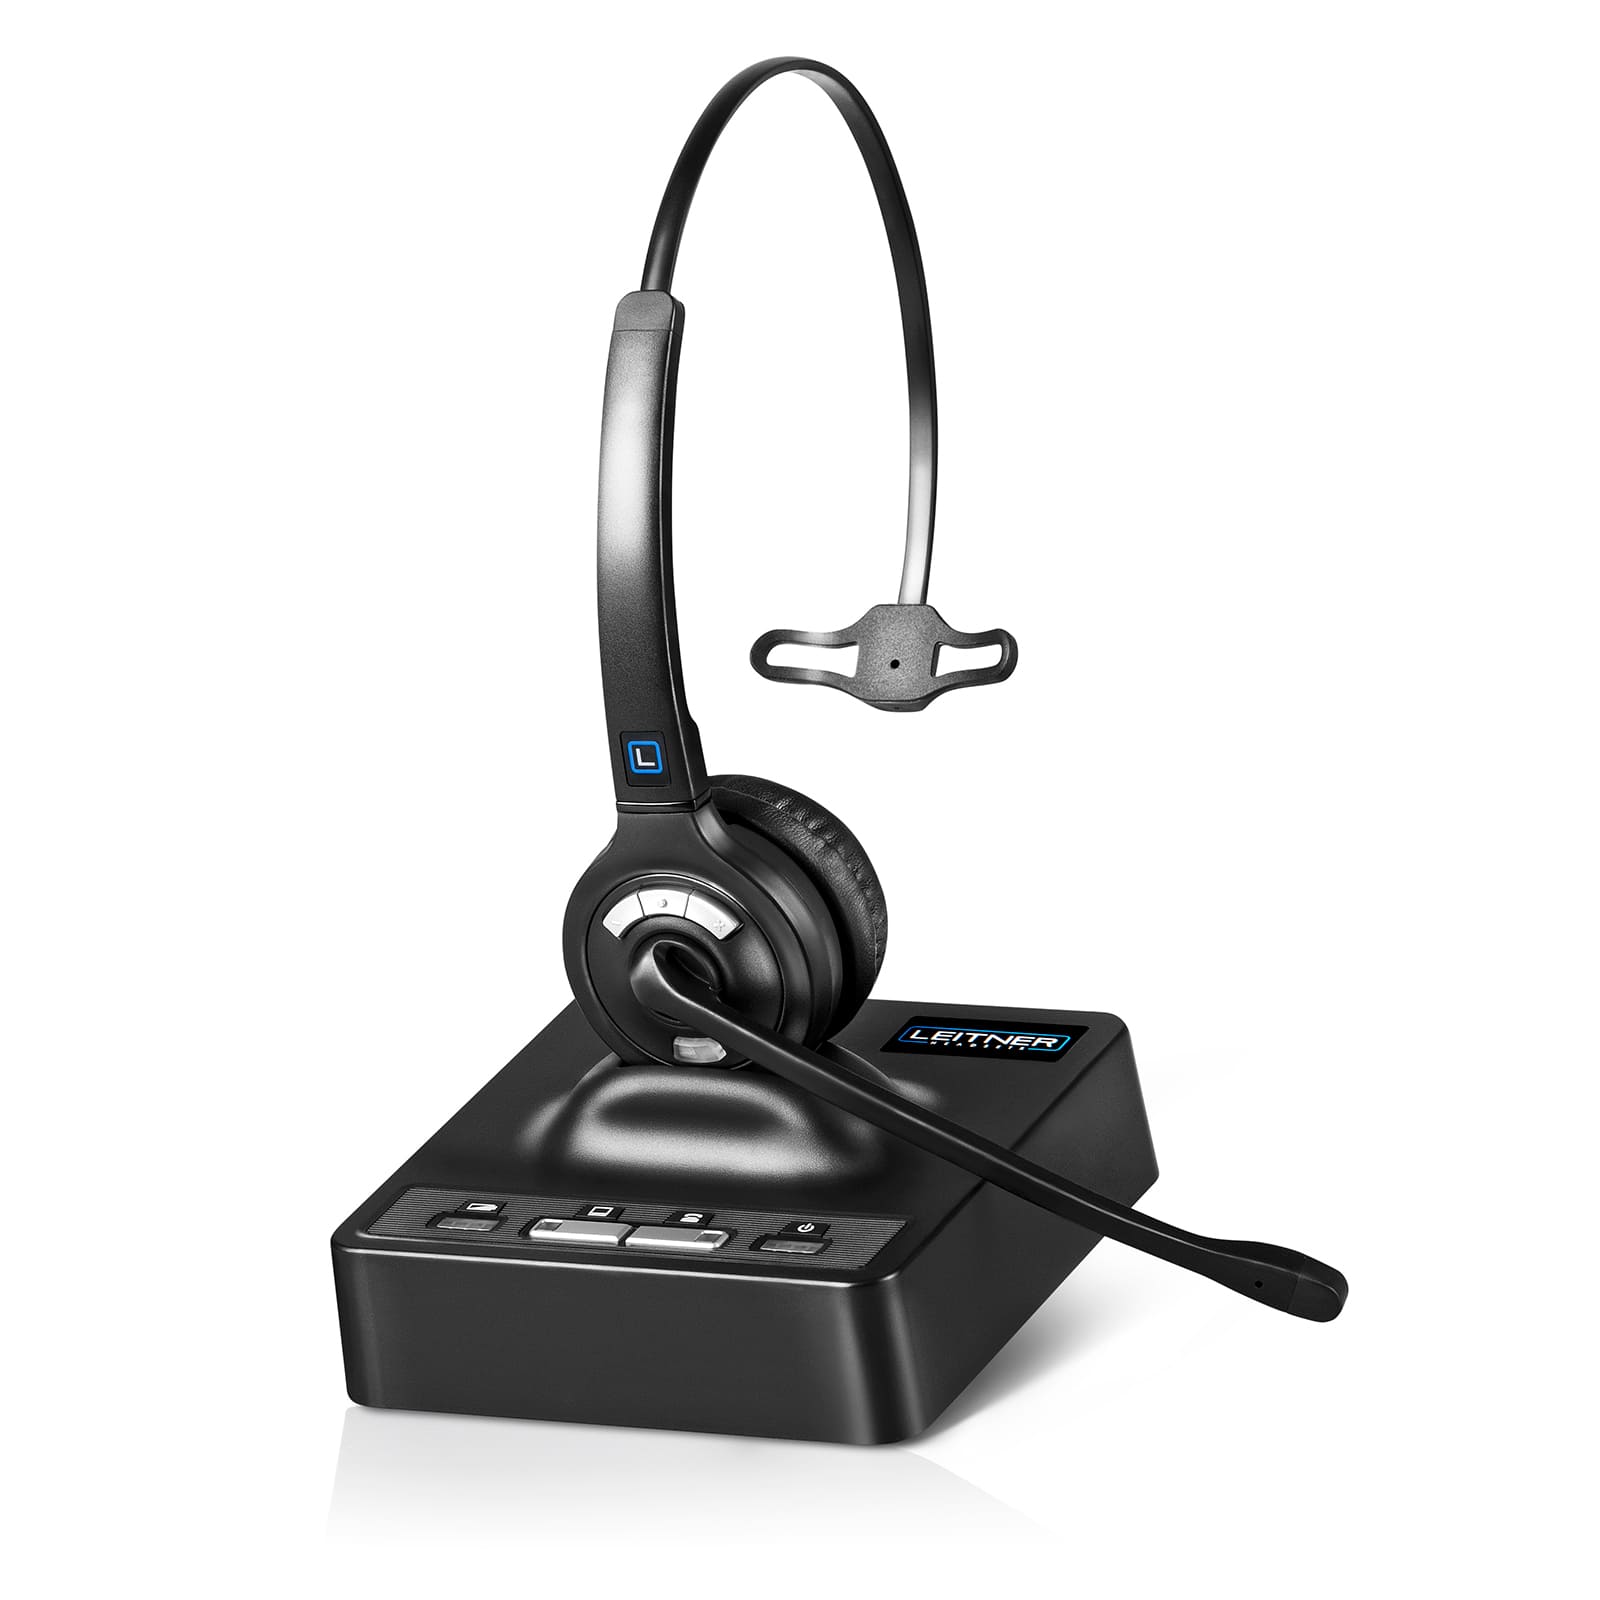 Leitner LH270 wireless headset with microphone for office and working at home